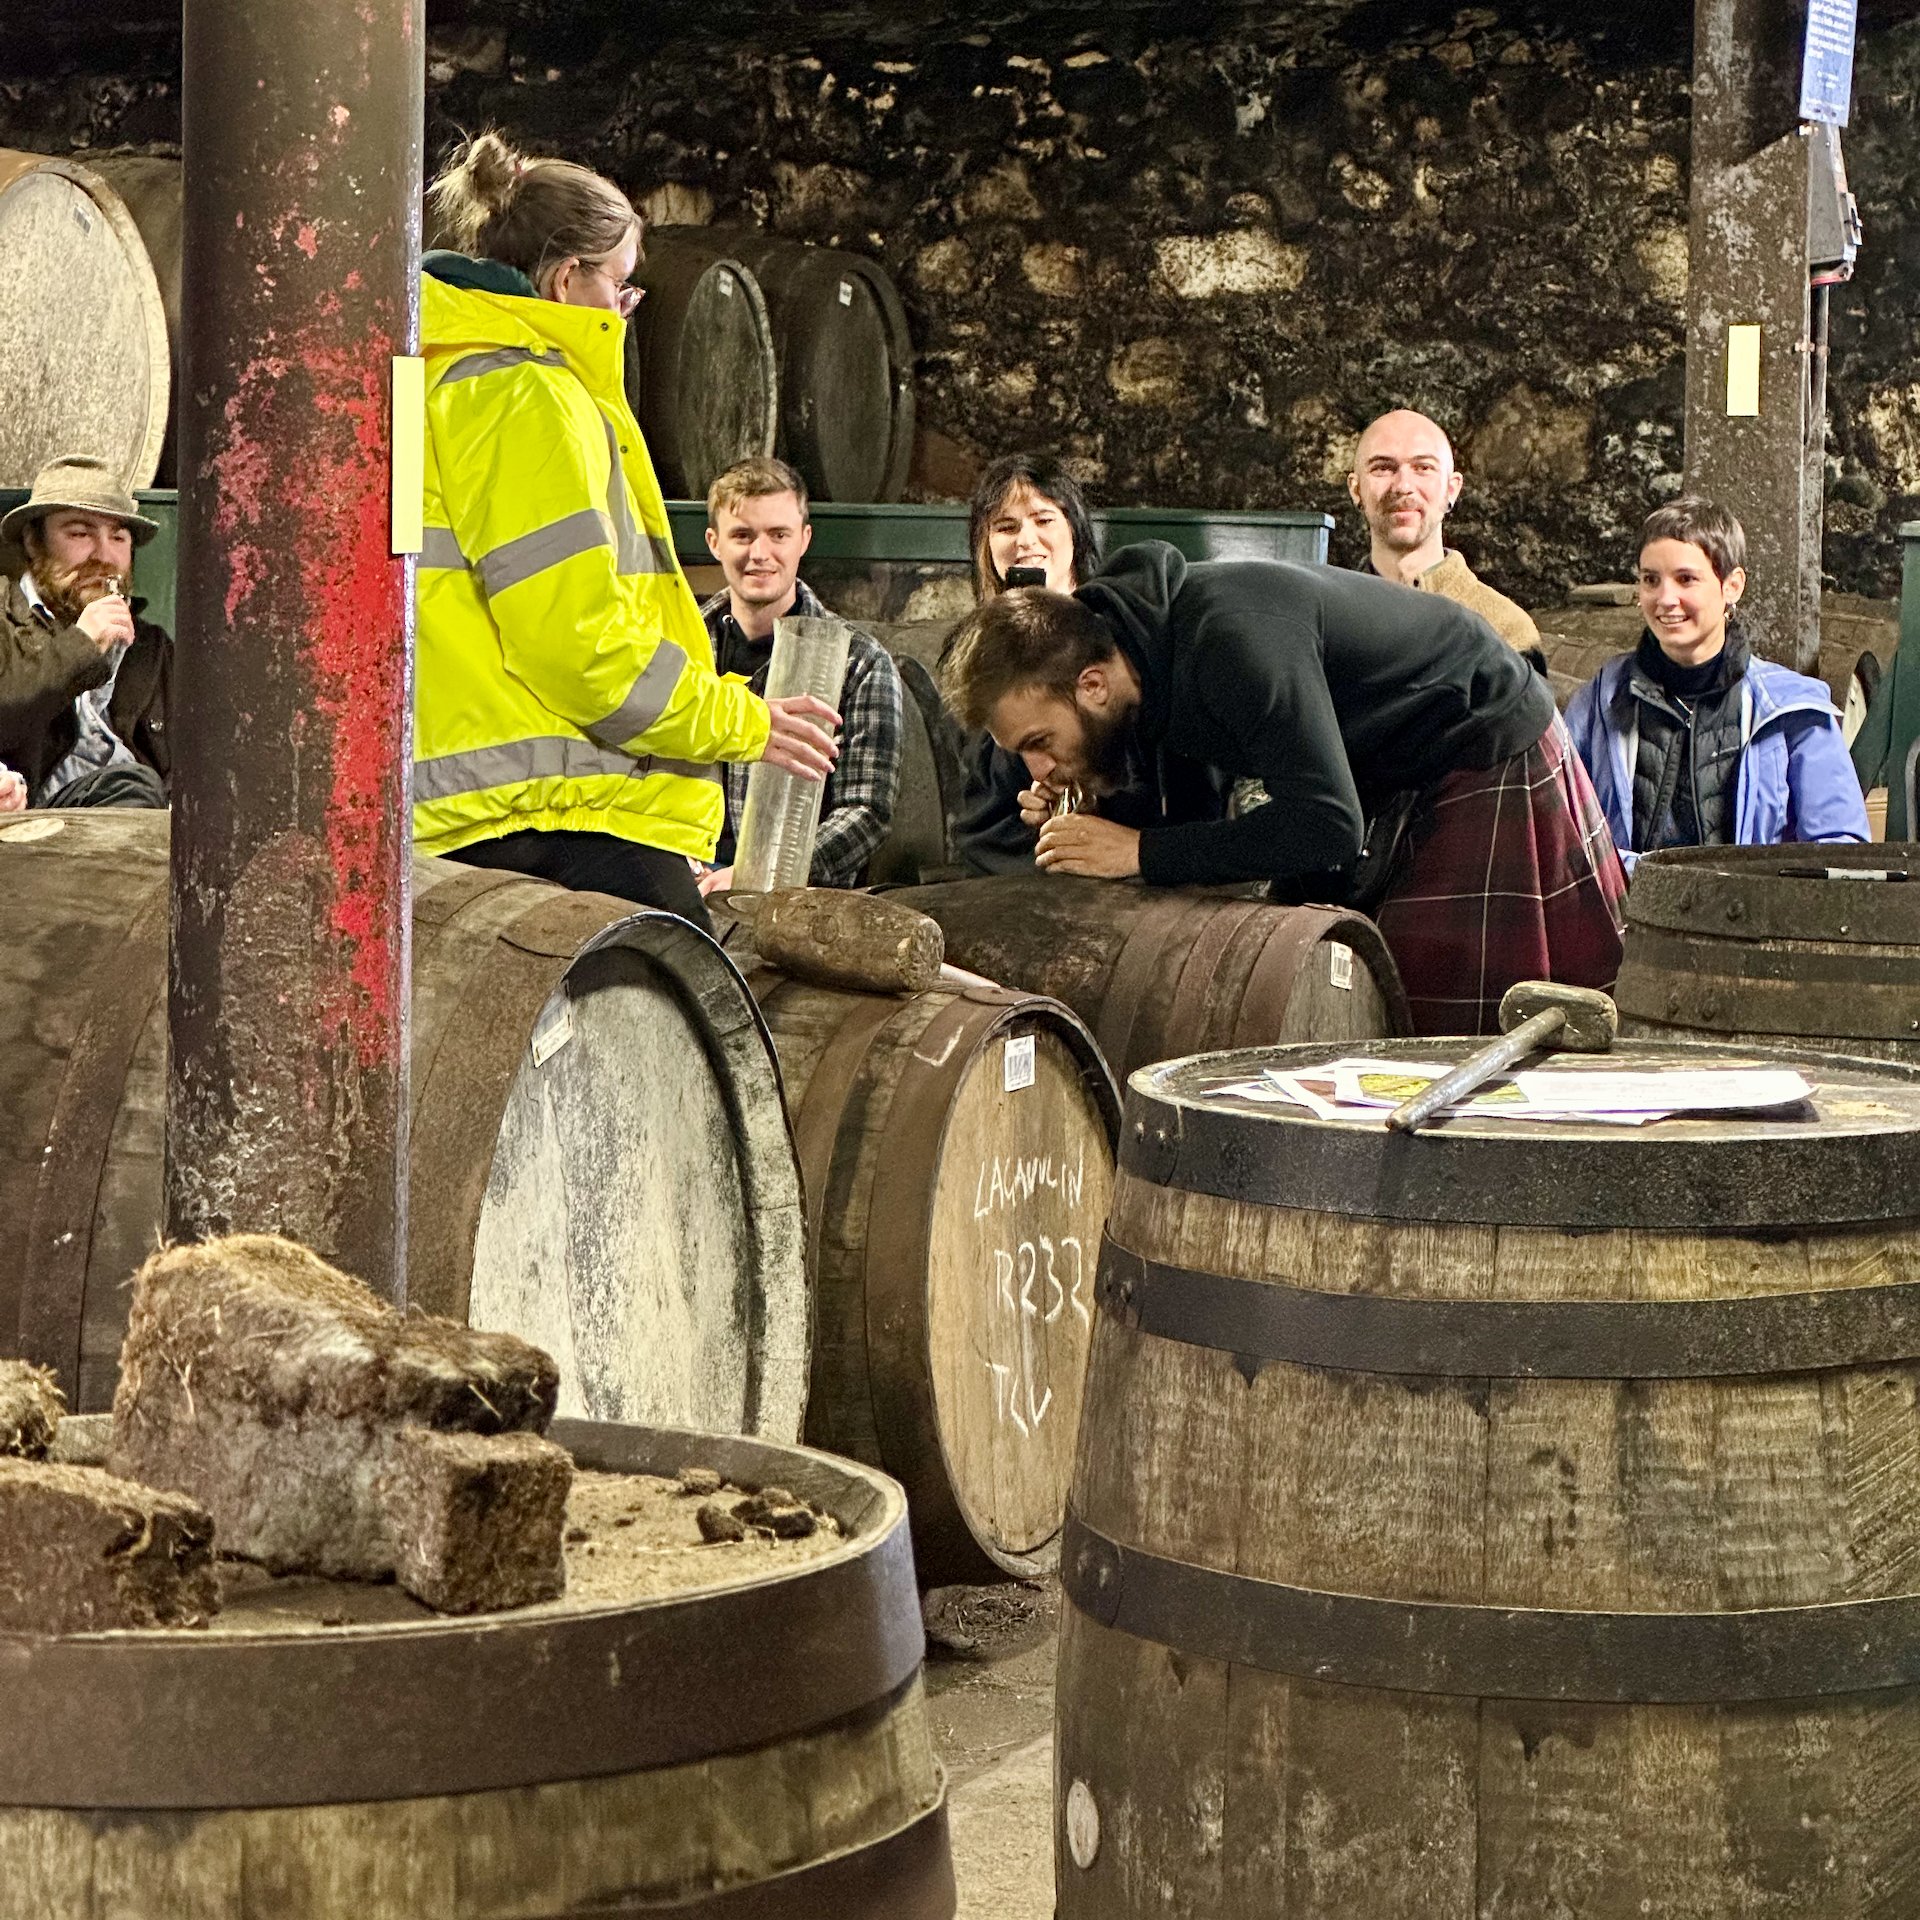  For a number of the tastings, we were getting it pulled straight from the cask! There was audience participation, which was so cool.  